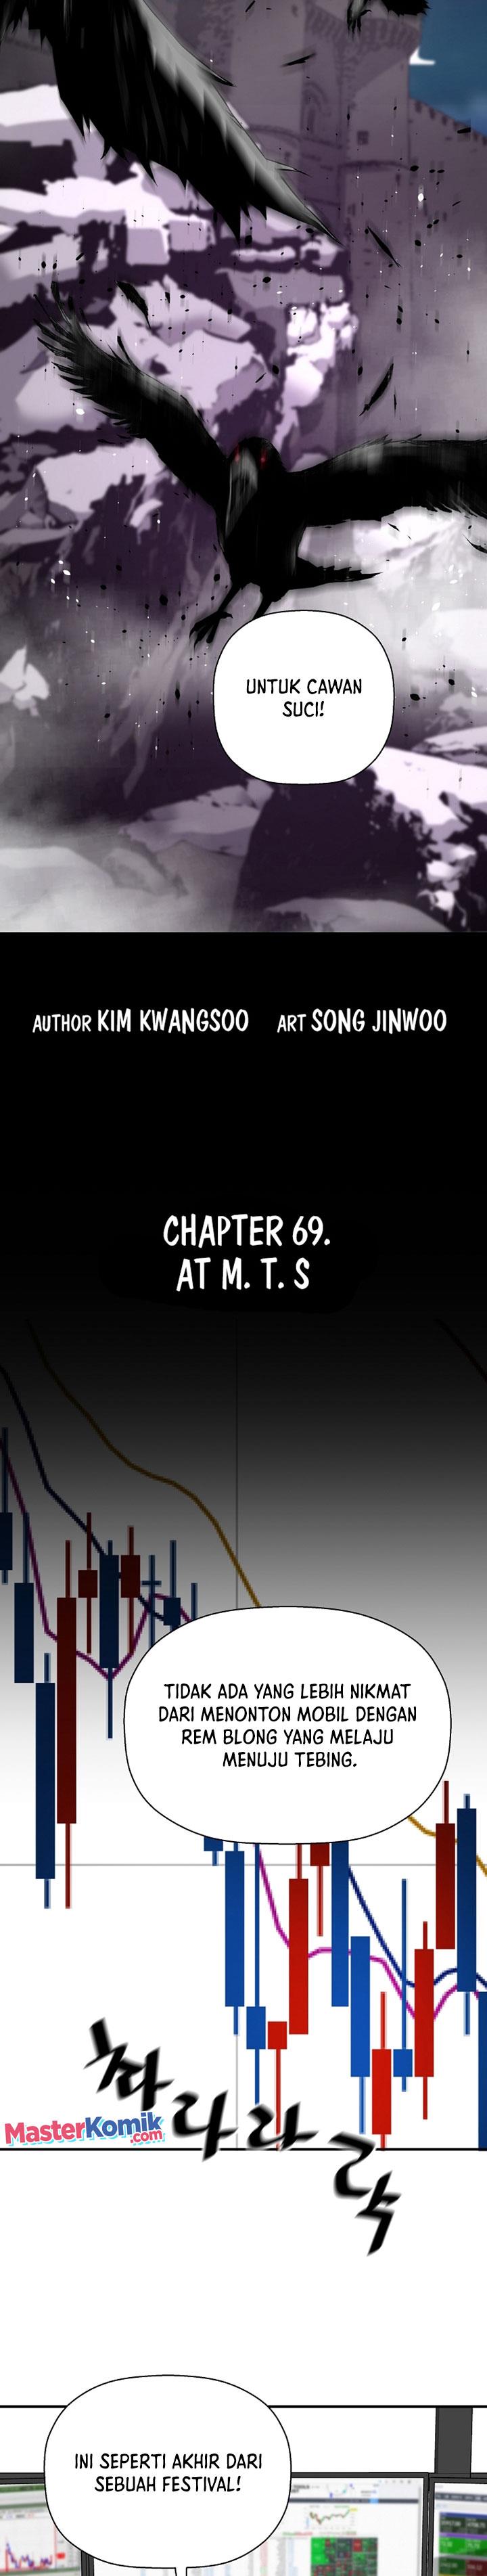 Return of the Legend Chapter 69